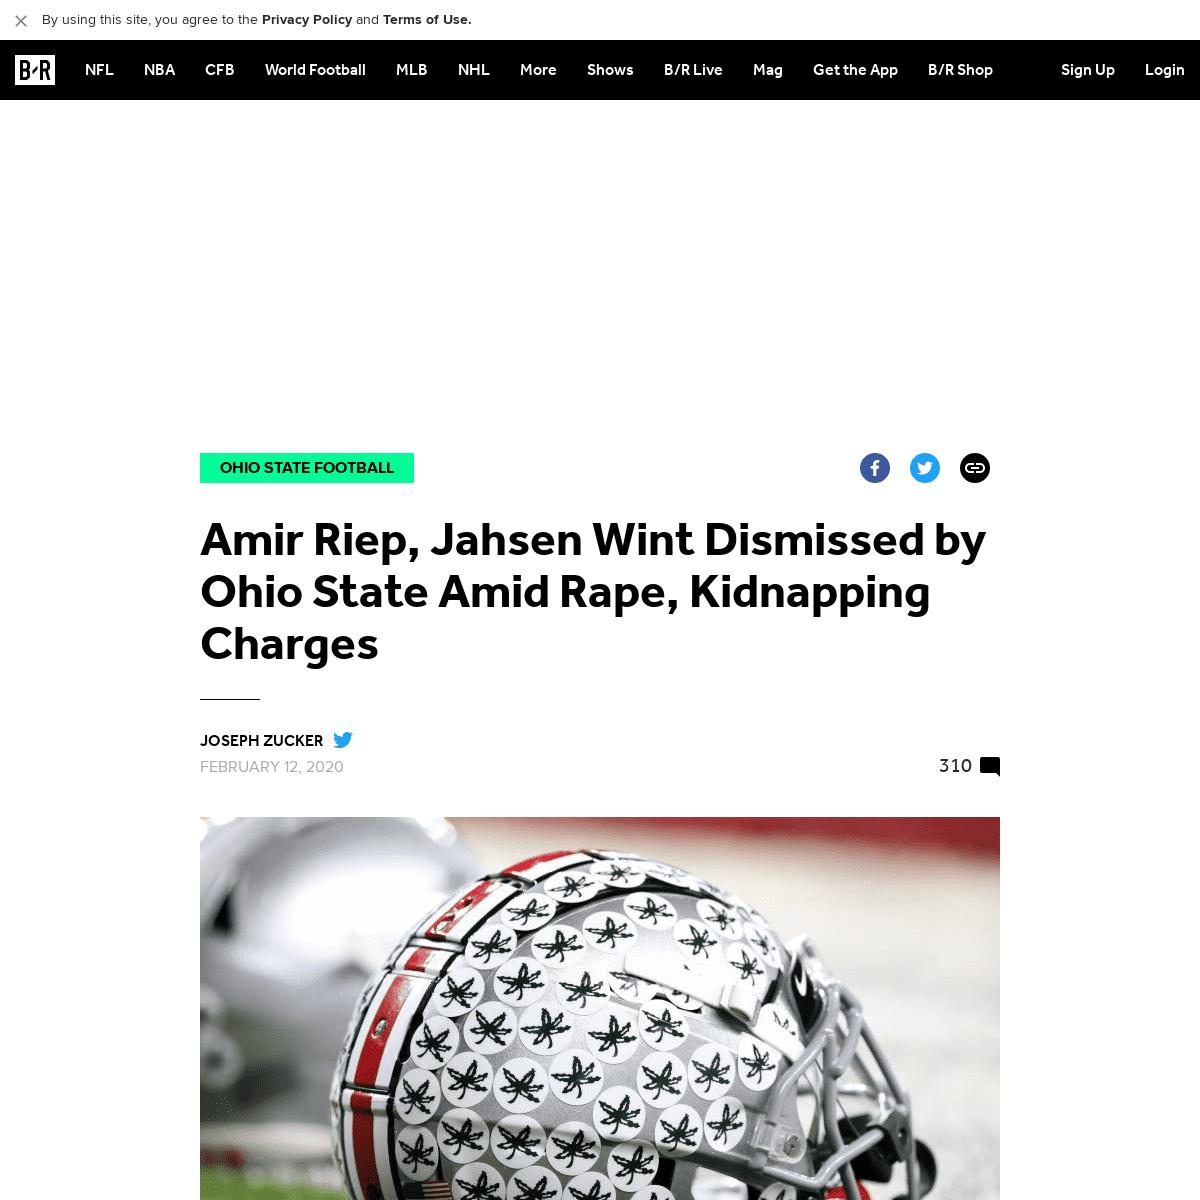 A complete backup of bleacherreport.com/articles/2876023-amir-riep-jahsen-wint-dismissed-by-ohio-state-amid-rape-kidnapping-char